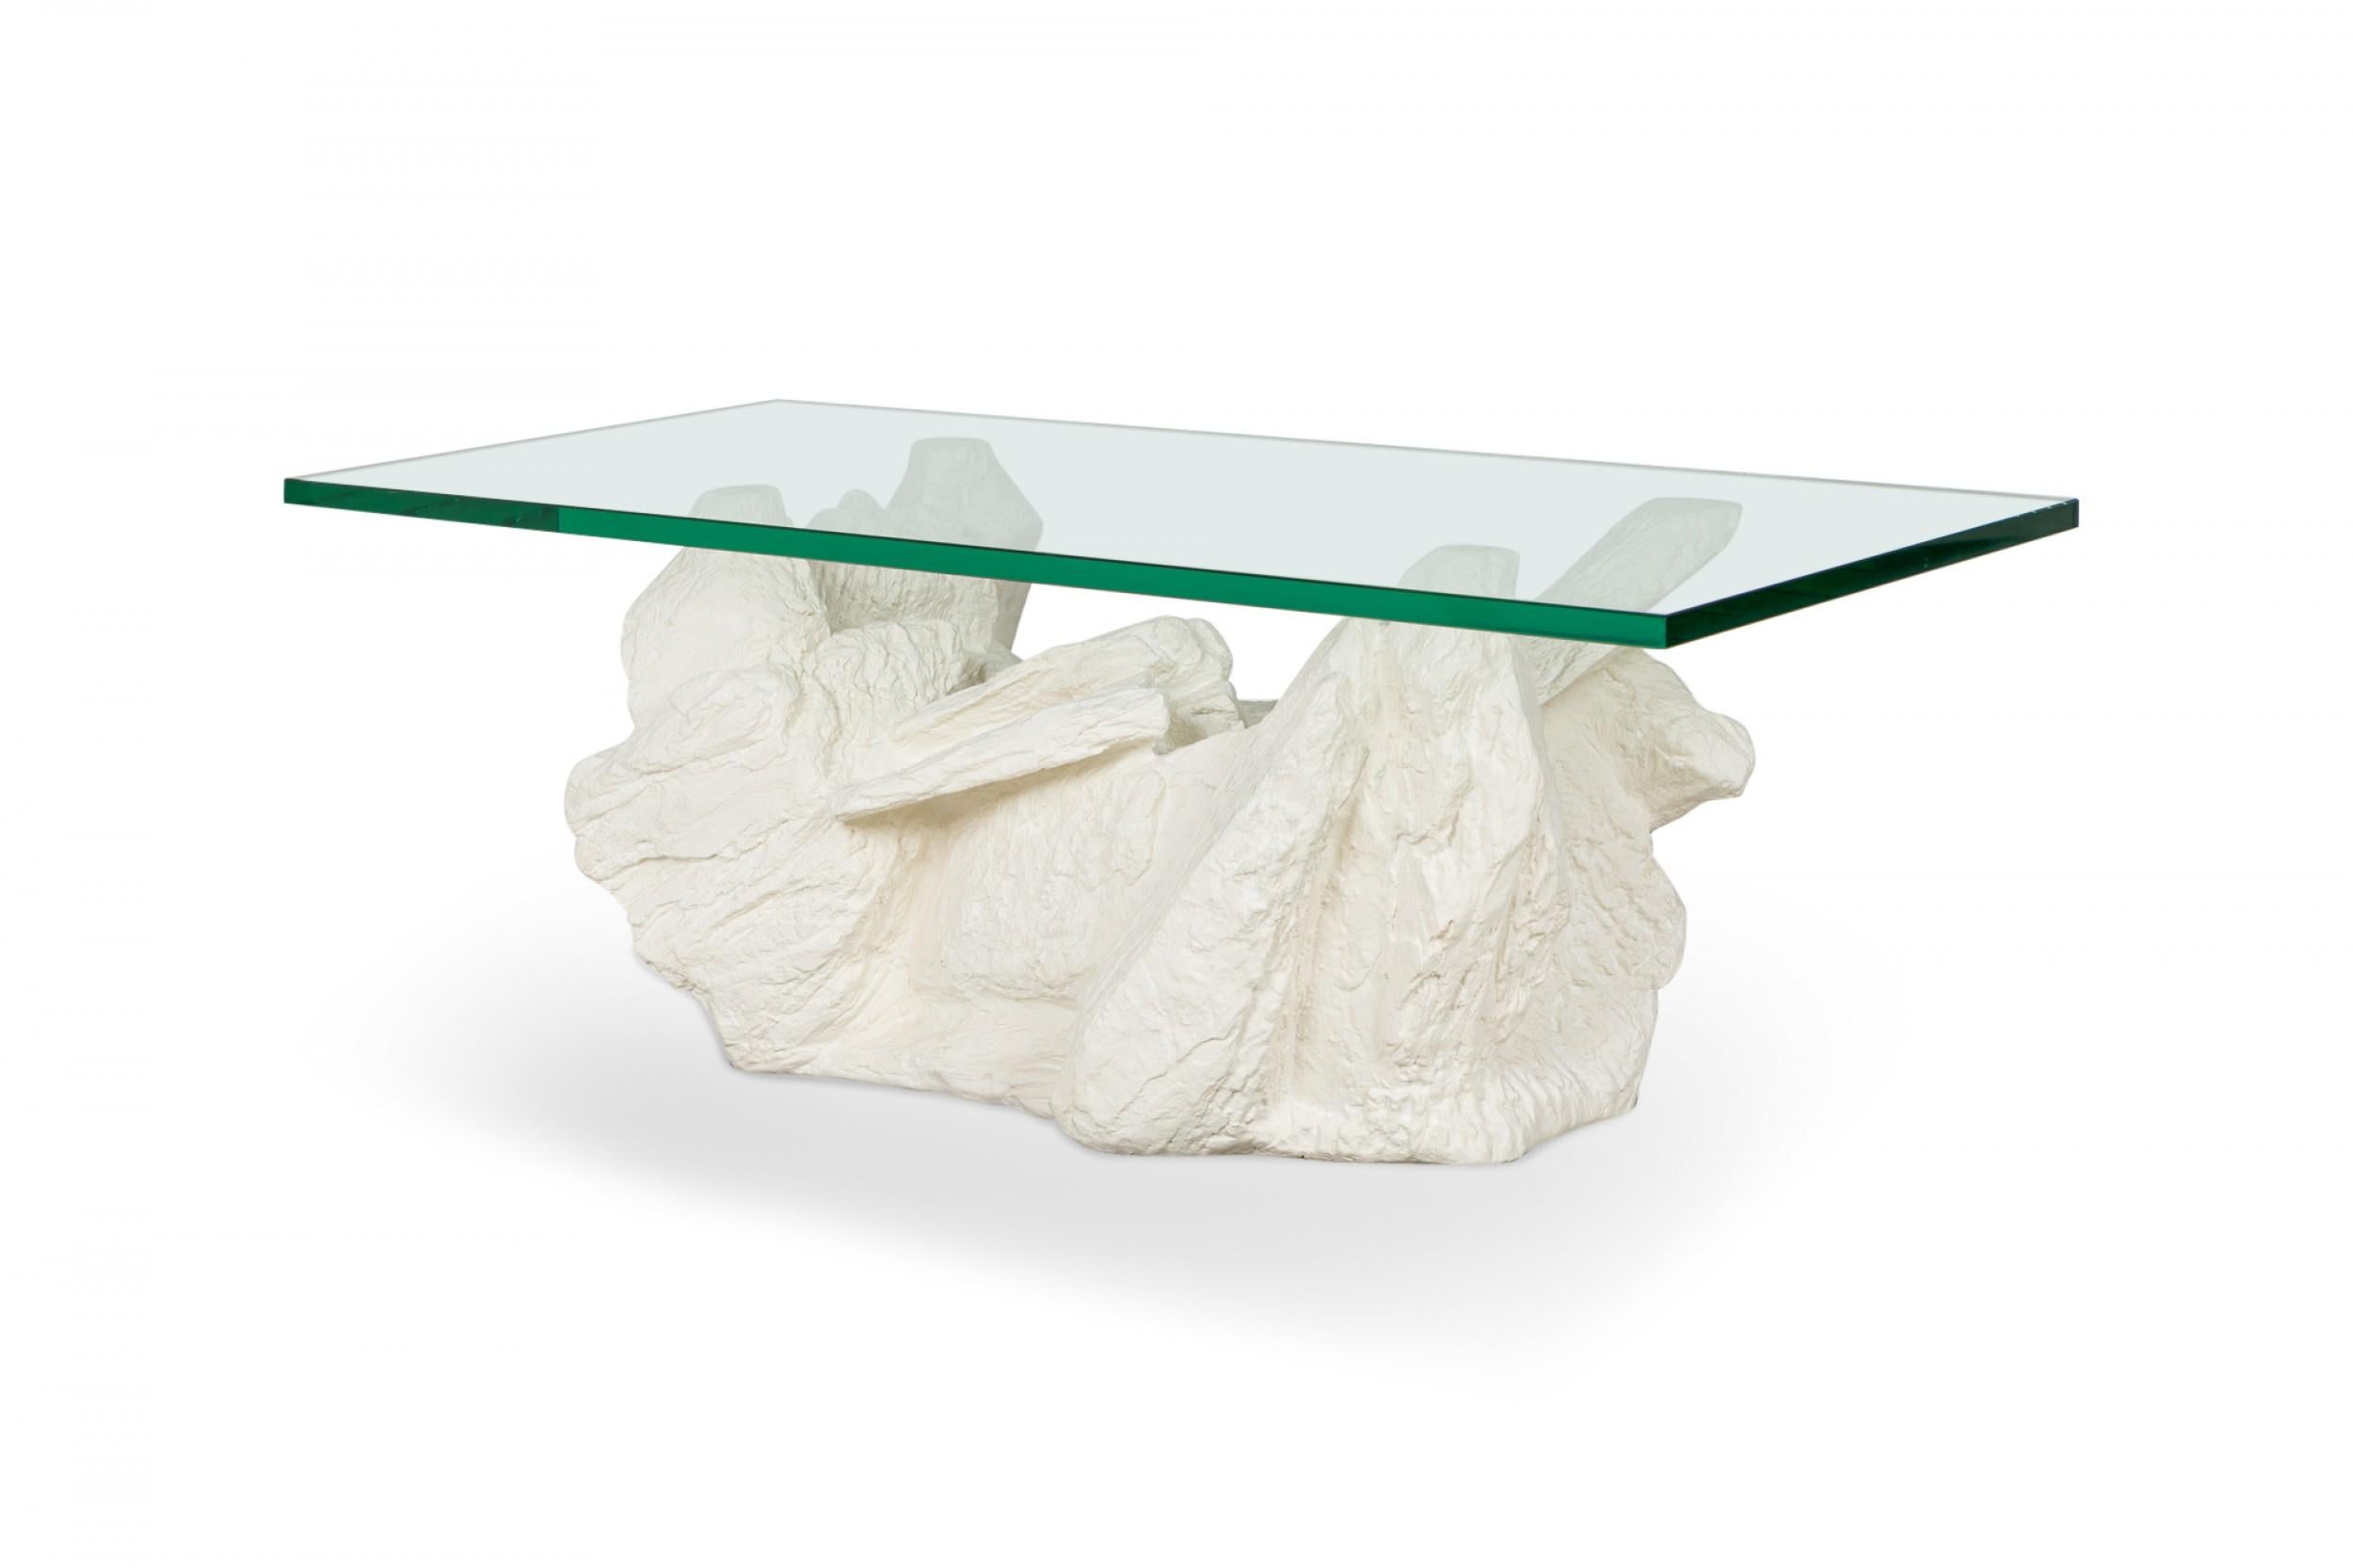 American Mid-Century cocktail / coffee table with a rectangular glass top supported by a white plaster faux bois stone base. (SIRMOS)
